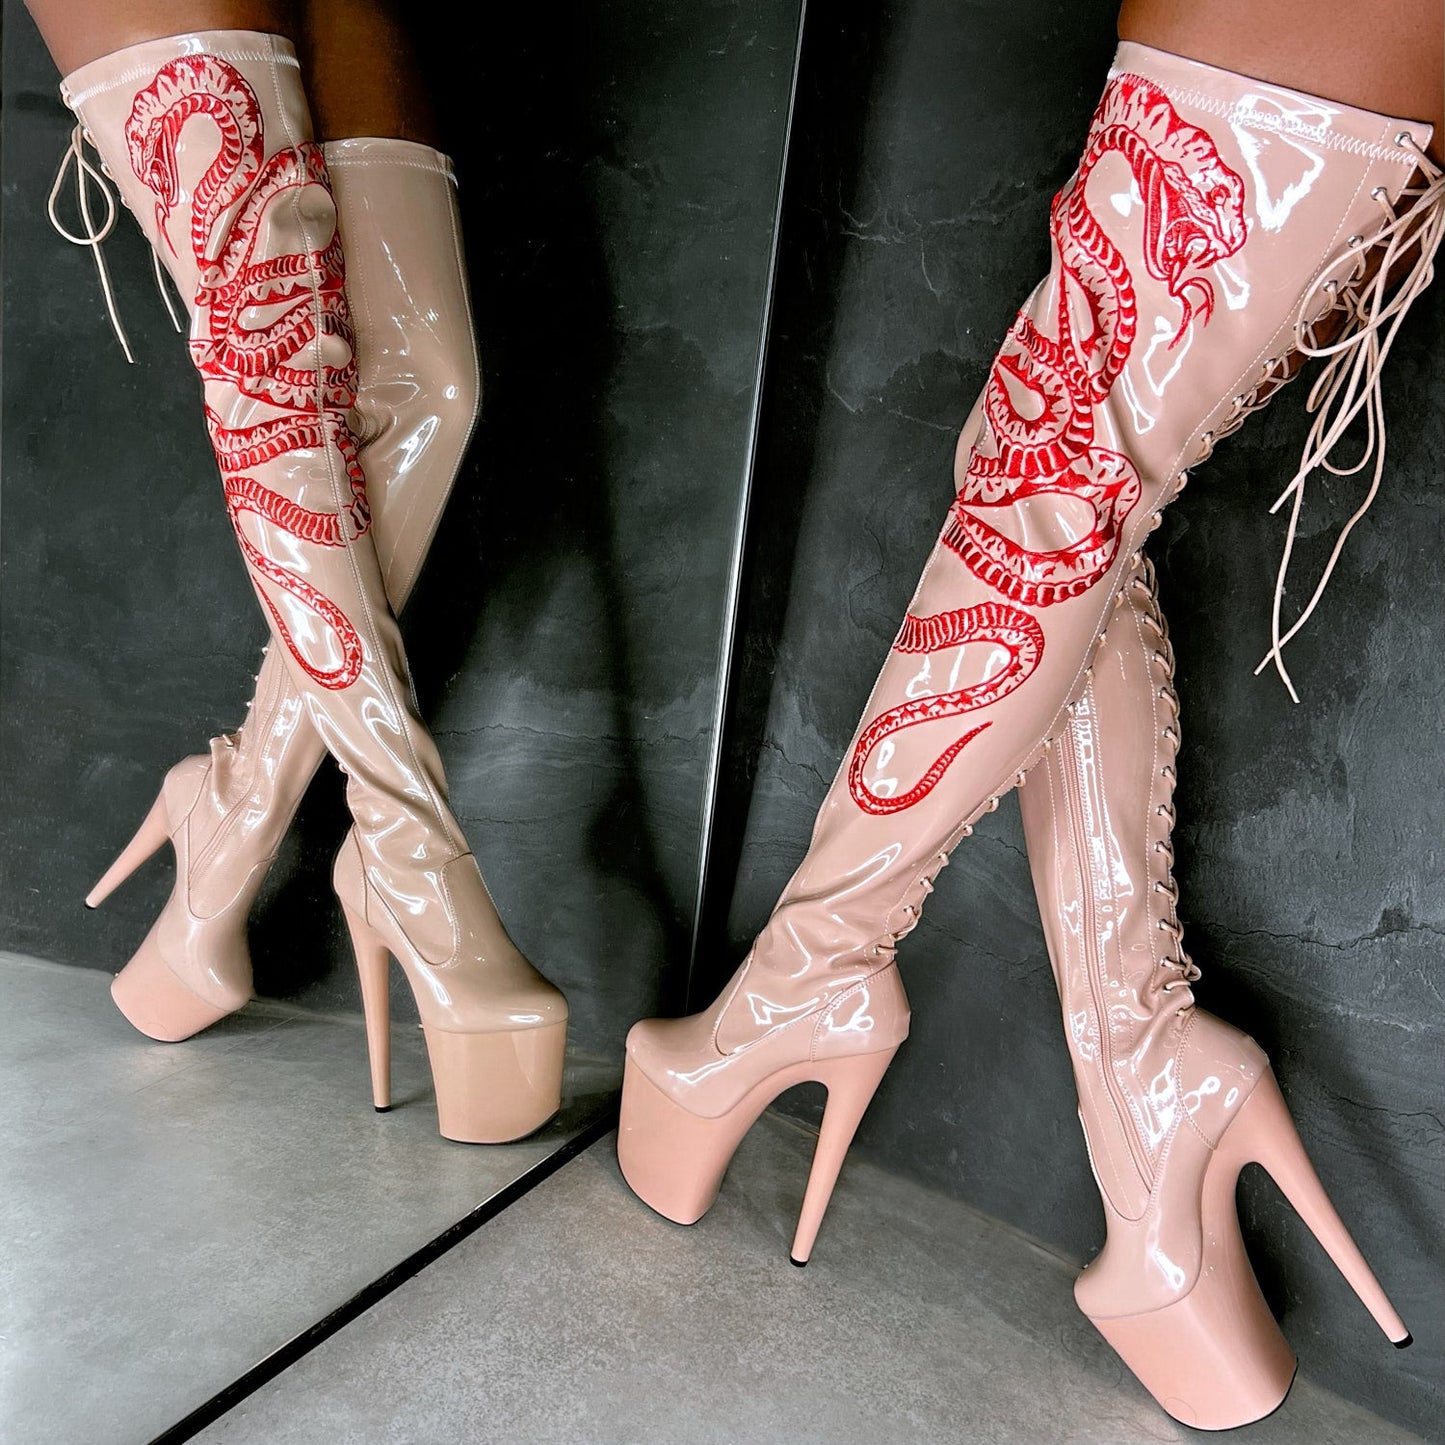 VIPER Boot Tan with Red Thigh High - 8INCH